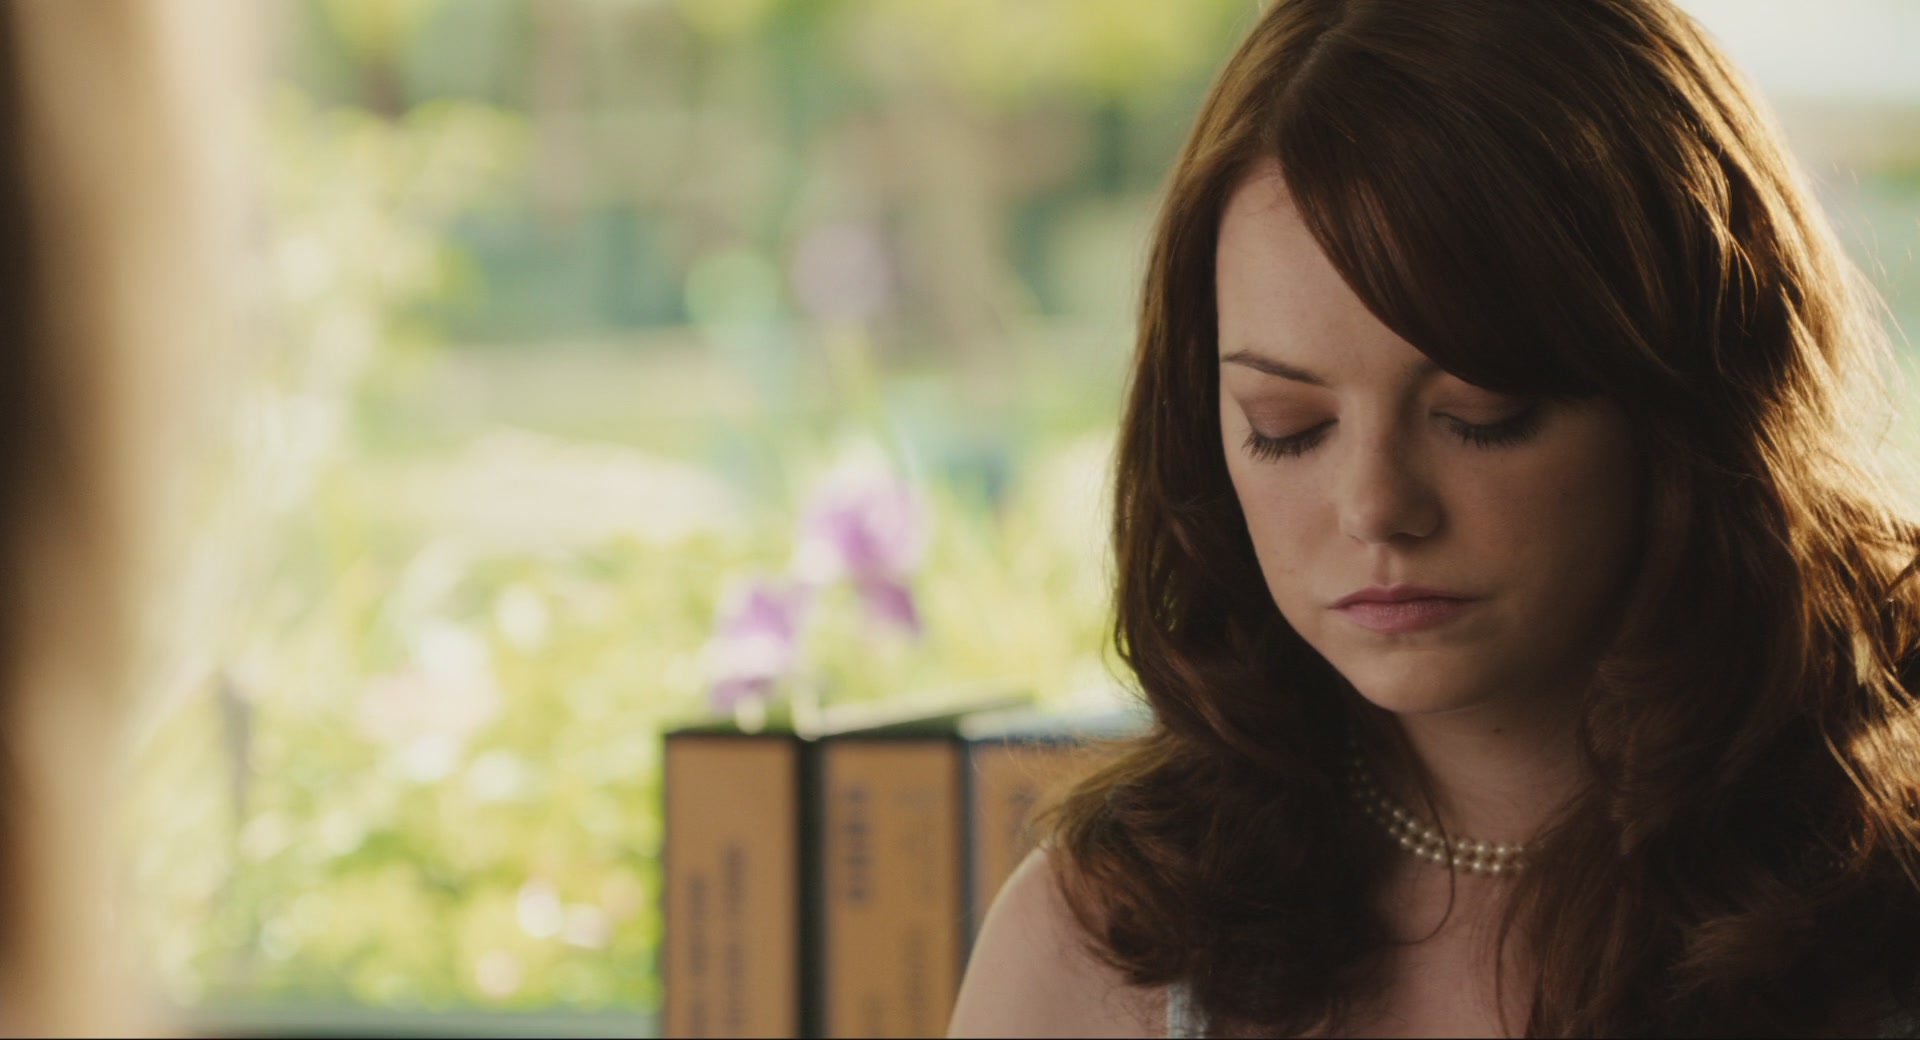 Easy A - Movies Image (30350776) - Fanpop1920 x 1040